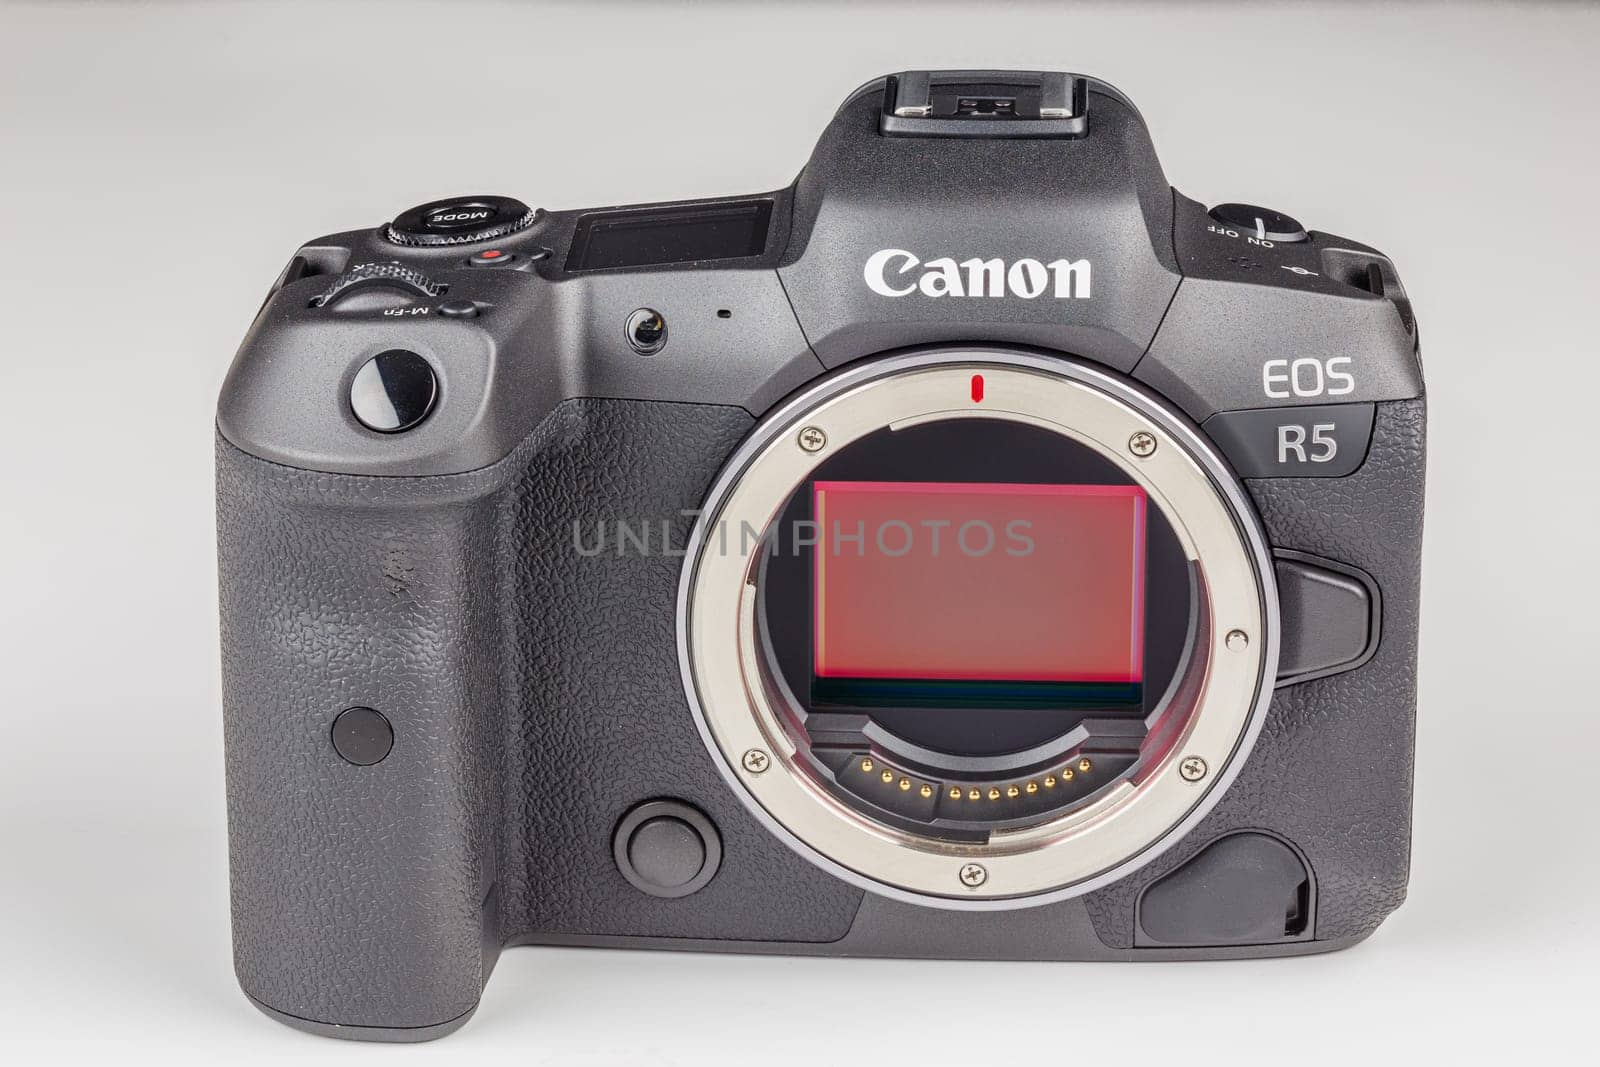 mirrorless digital camera body Canon R5 without lens on white background by z1b